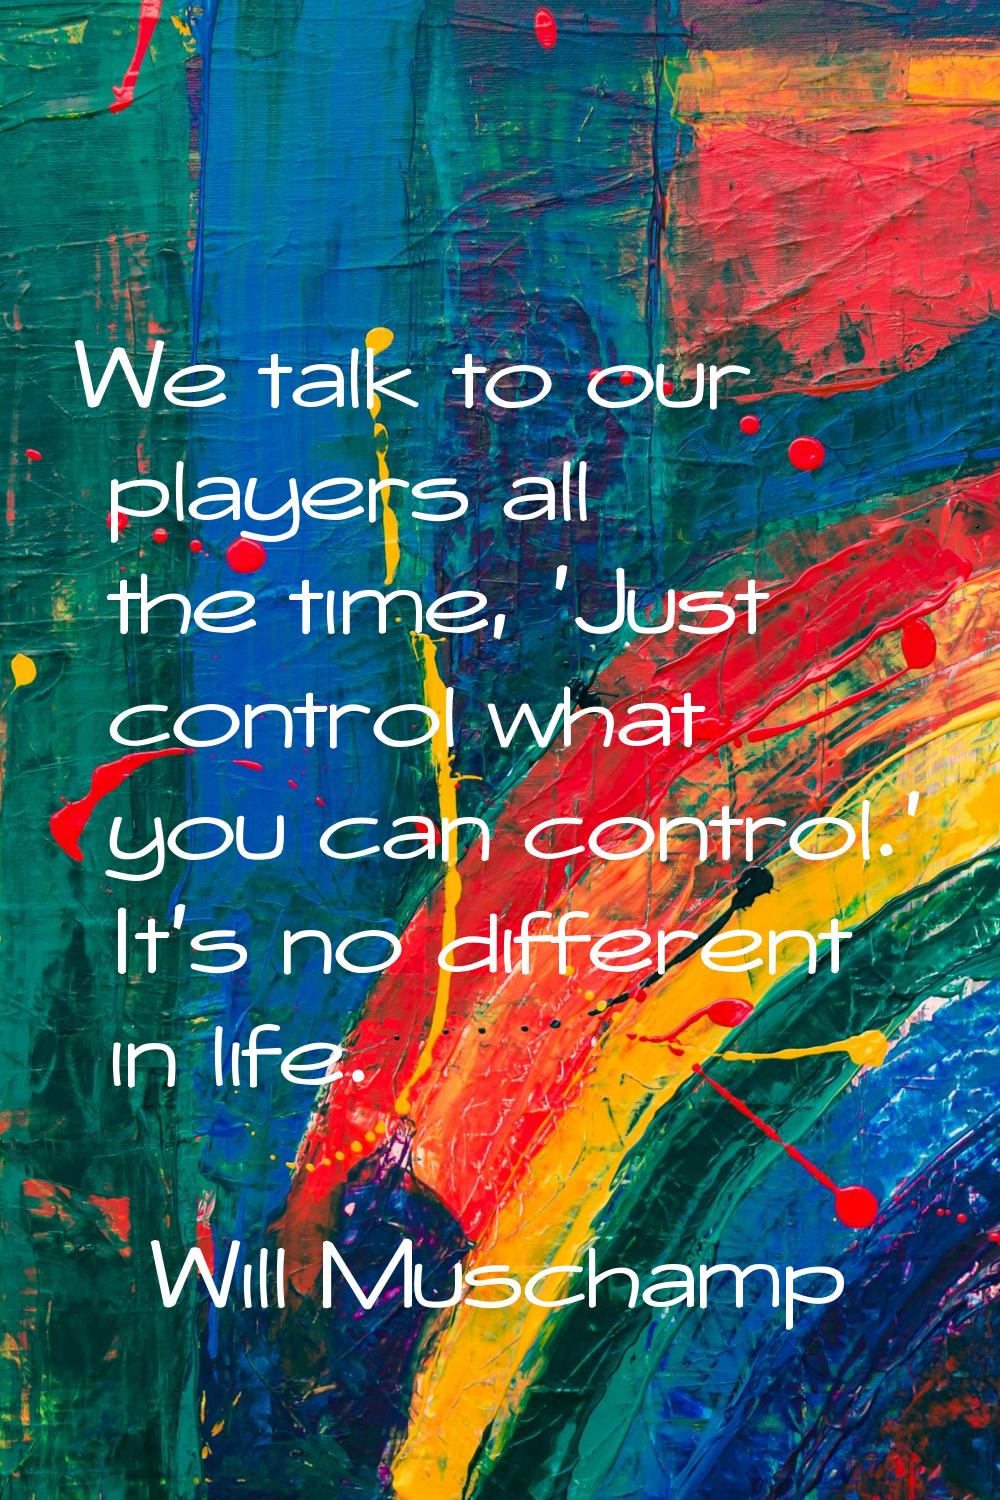 We talk to our players all the time, 'Just control what you can control.' It's no different in life